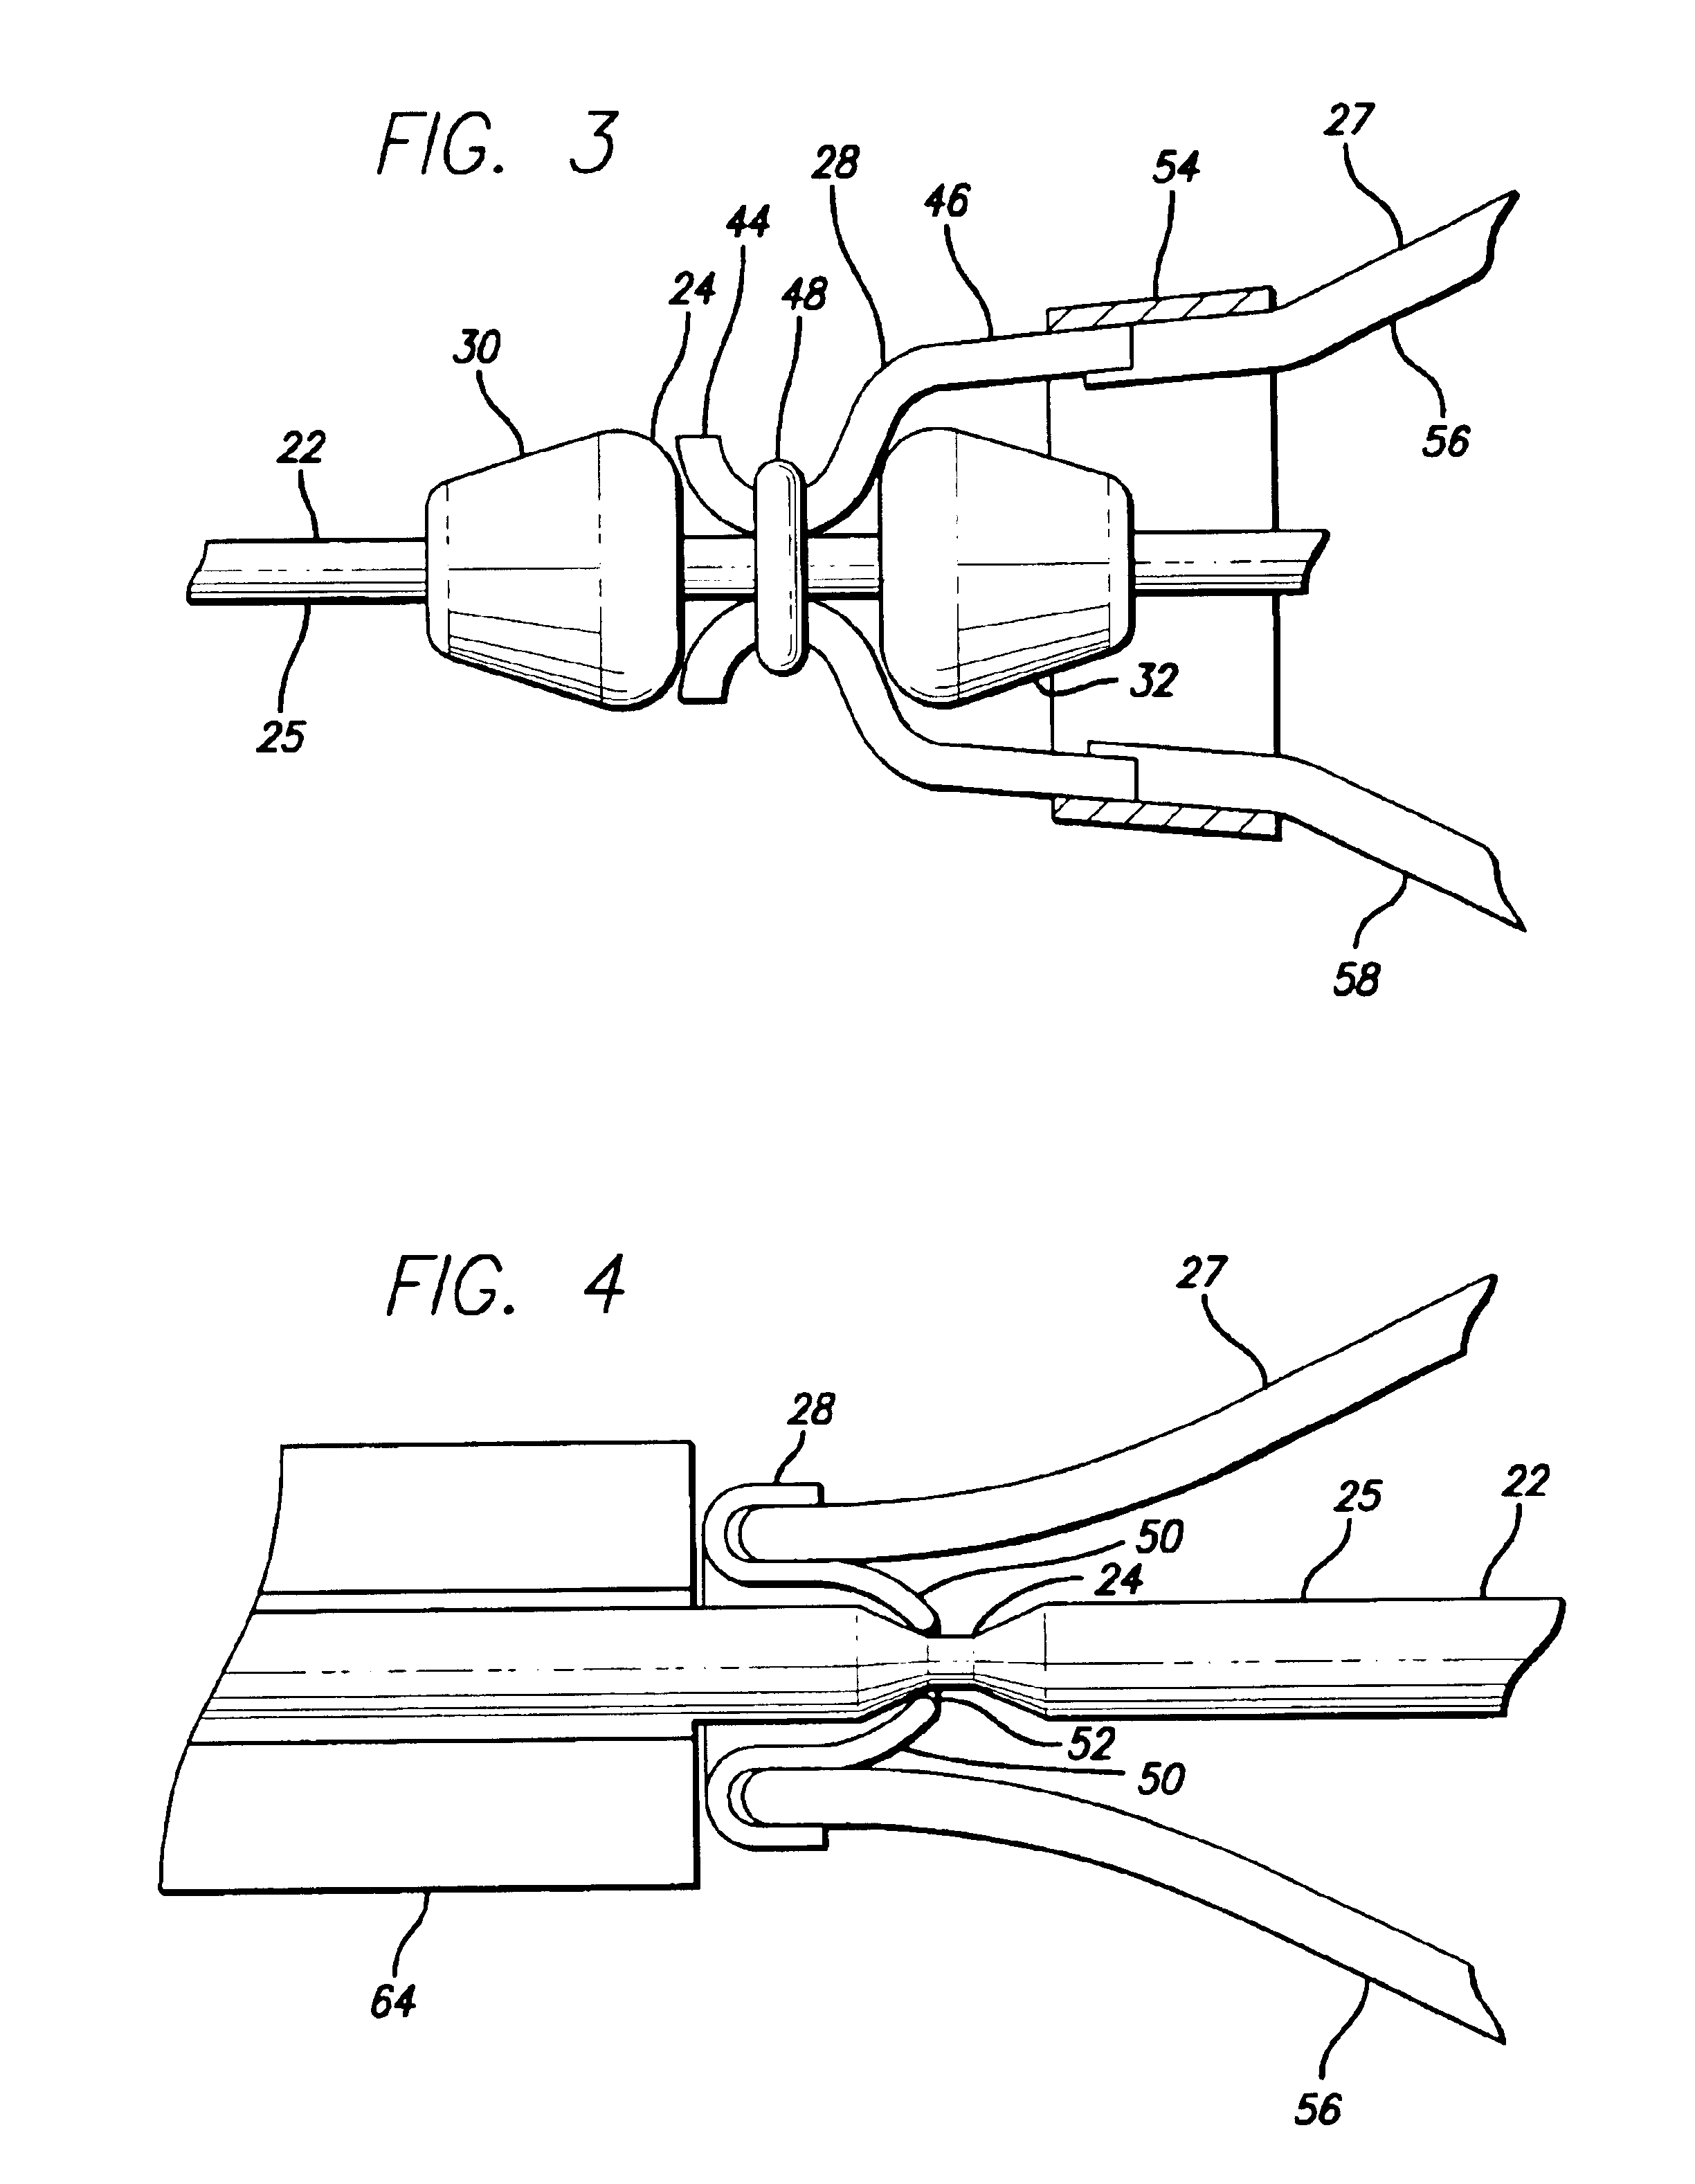 Intraluminal delivery system for an attachable treatment device